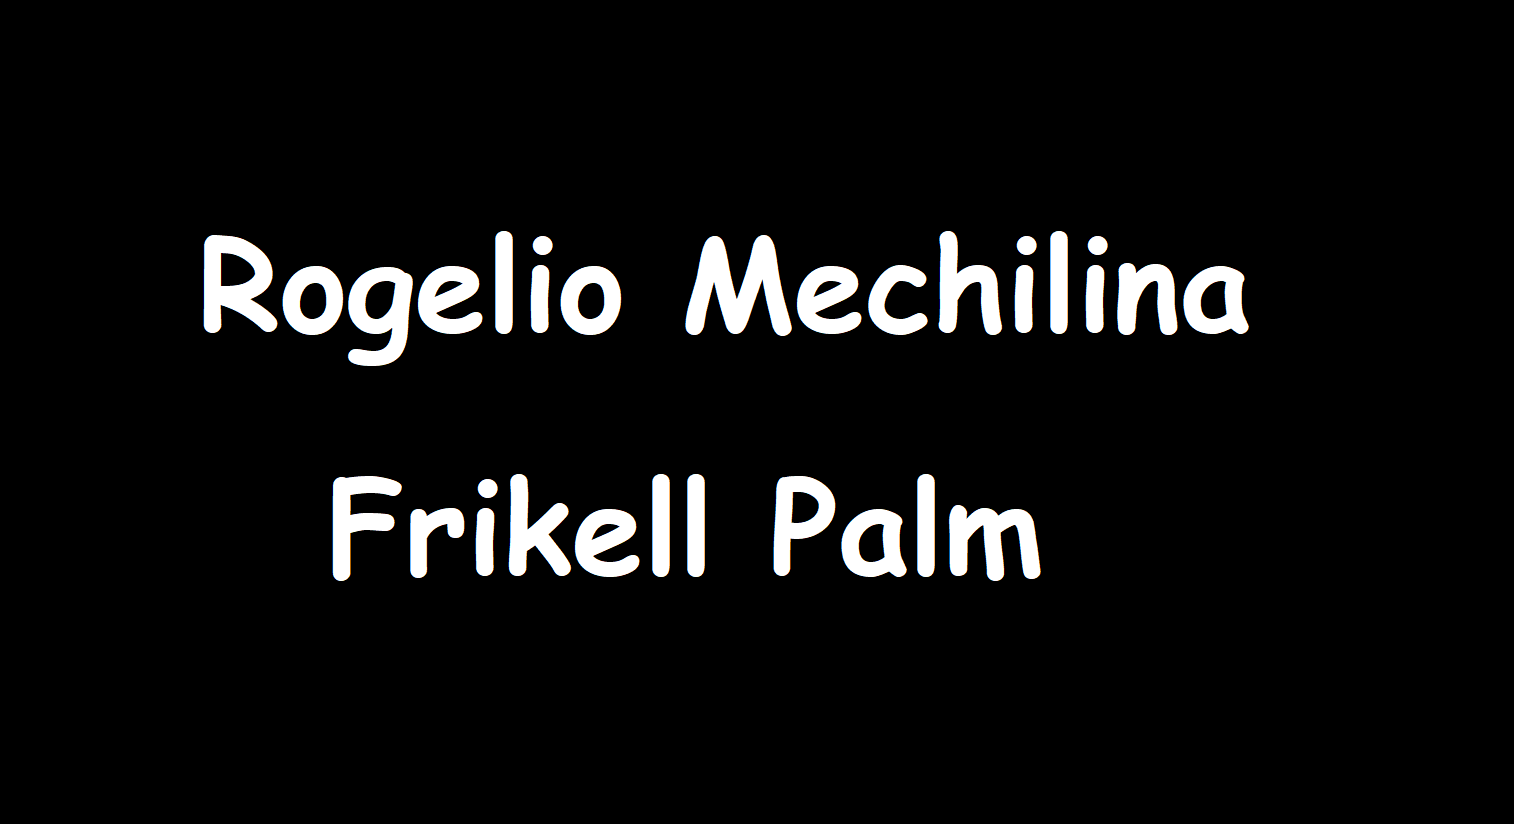 Frikell Palm Extension By Rogelio Mechilina